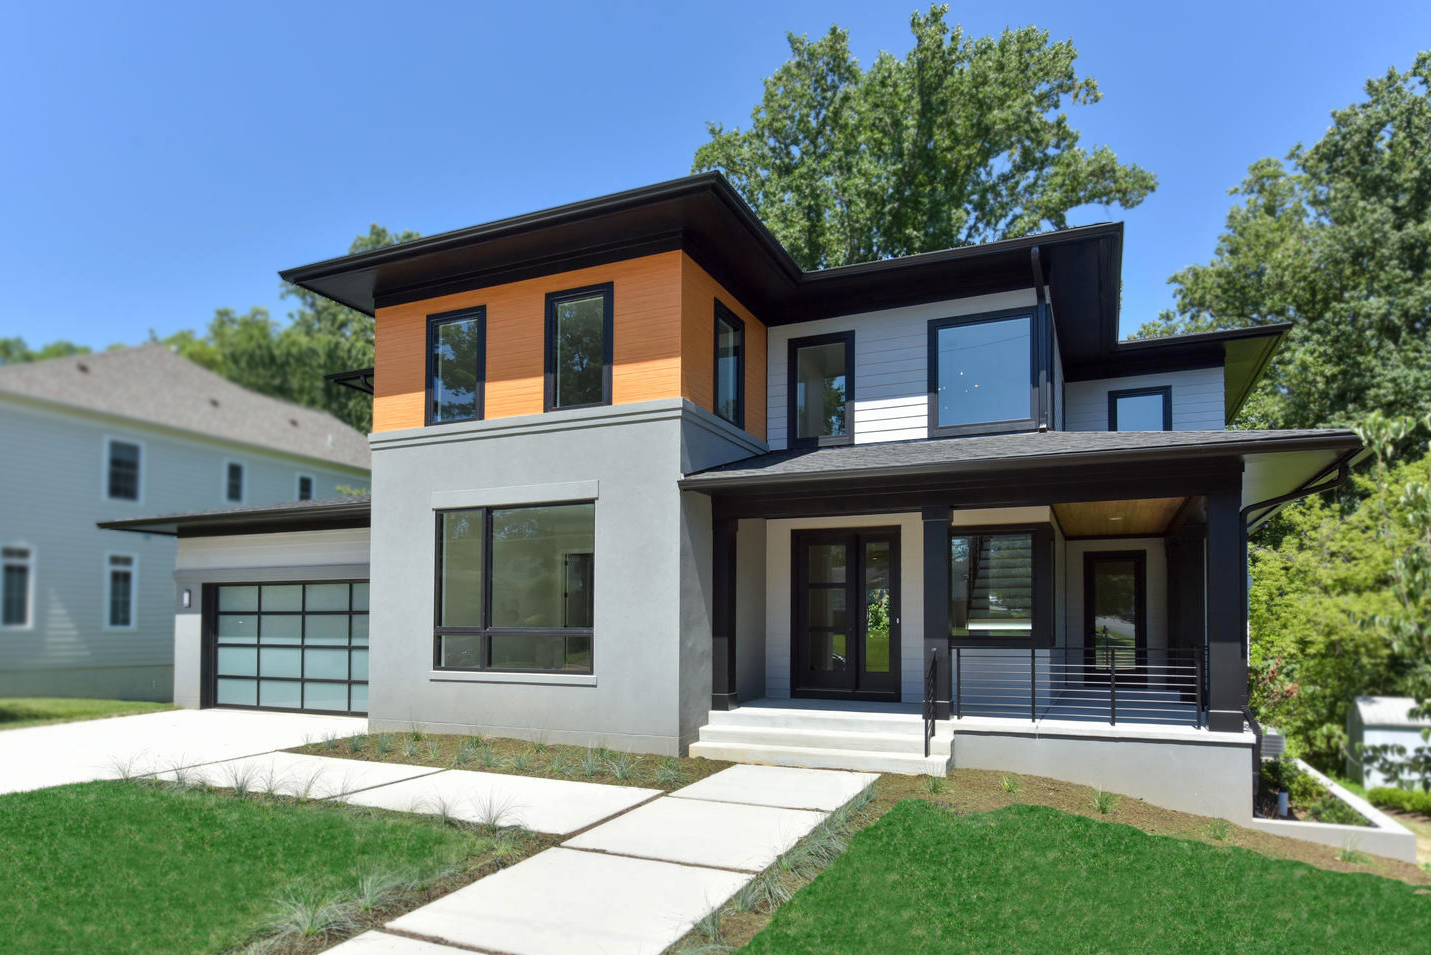 Custom Home Exterior - Modern Architectural Style